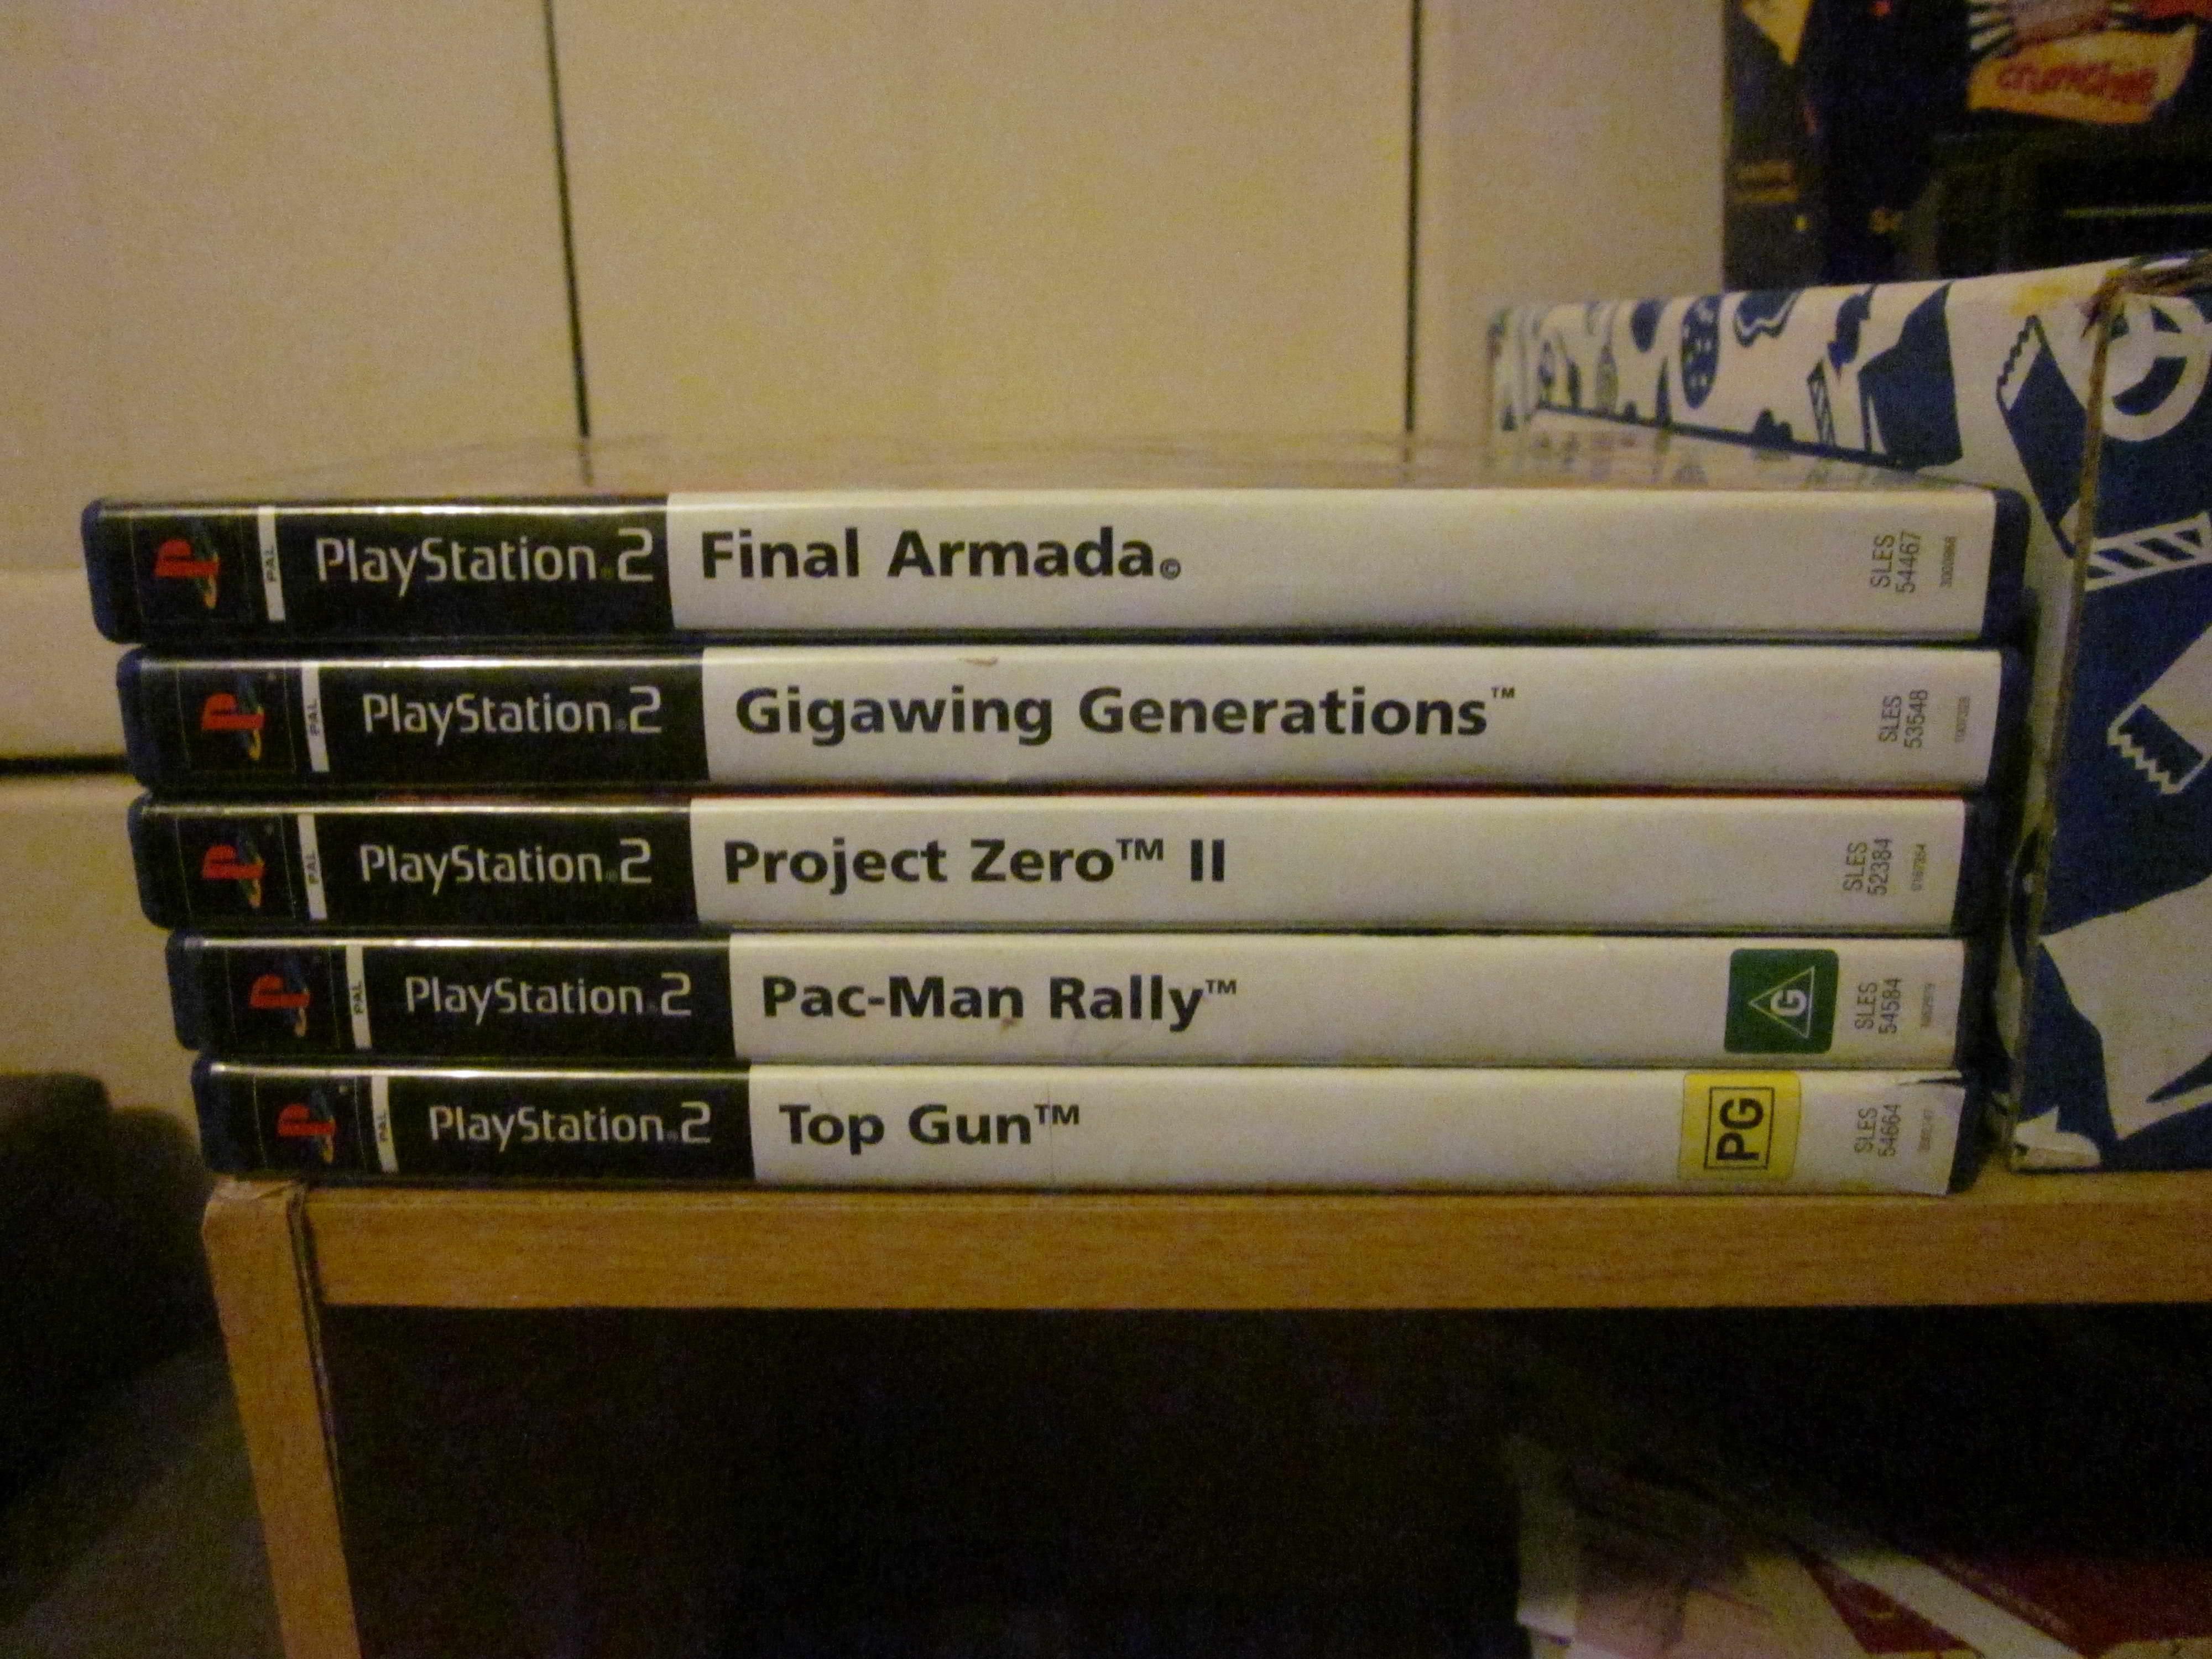 Newest Additions Of The Playstation